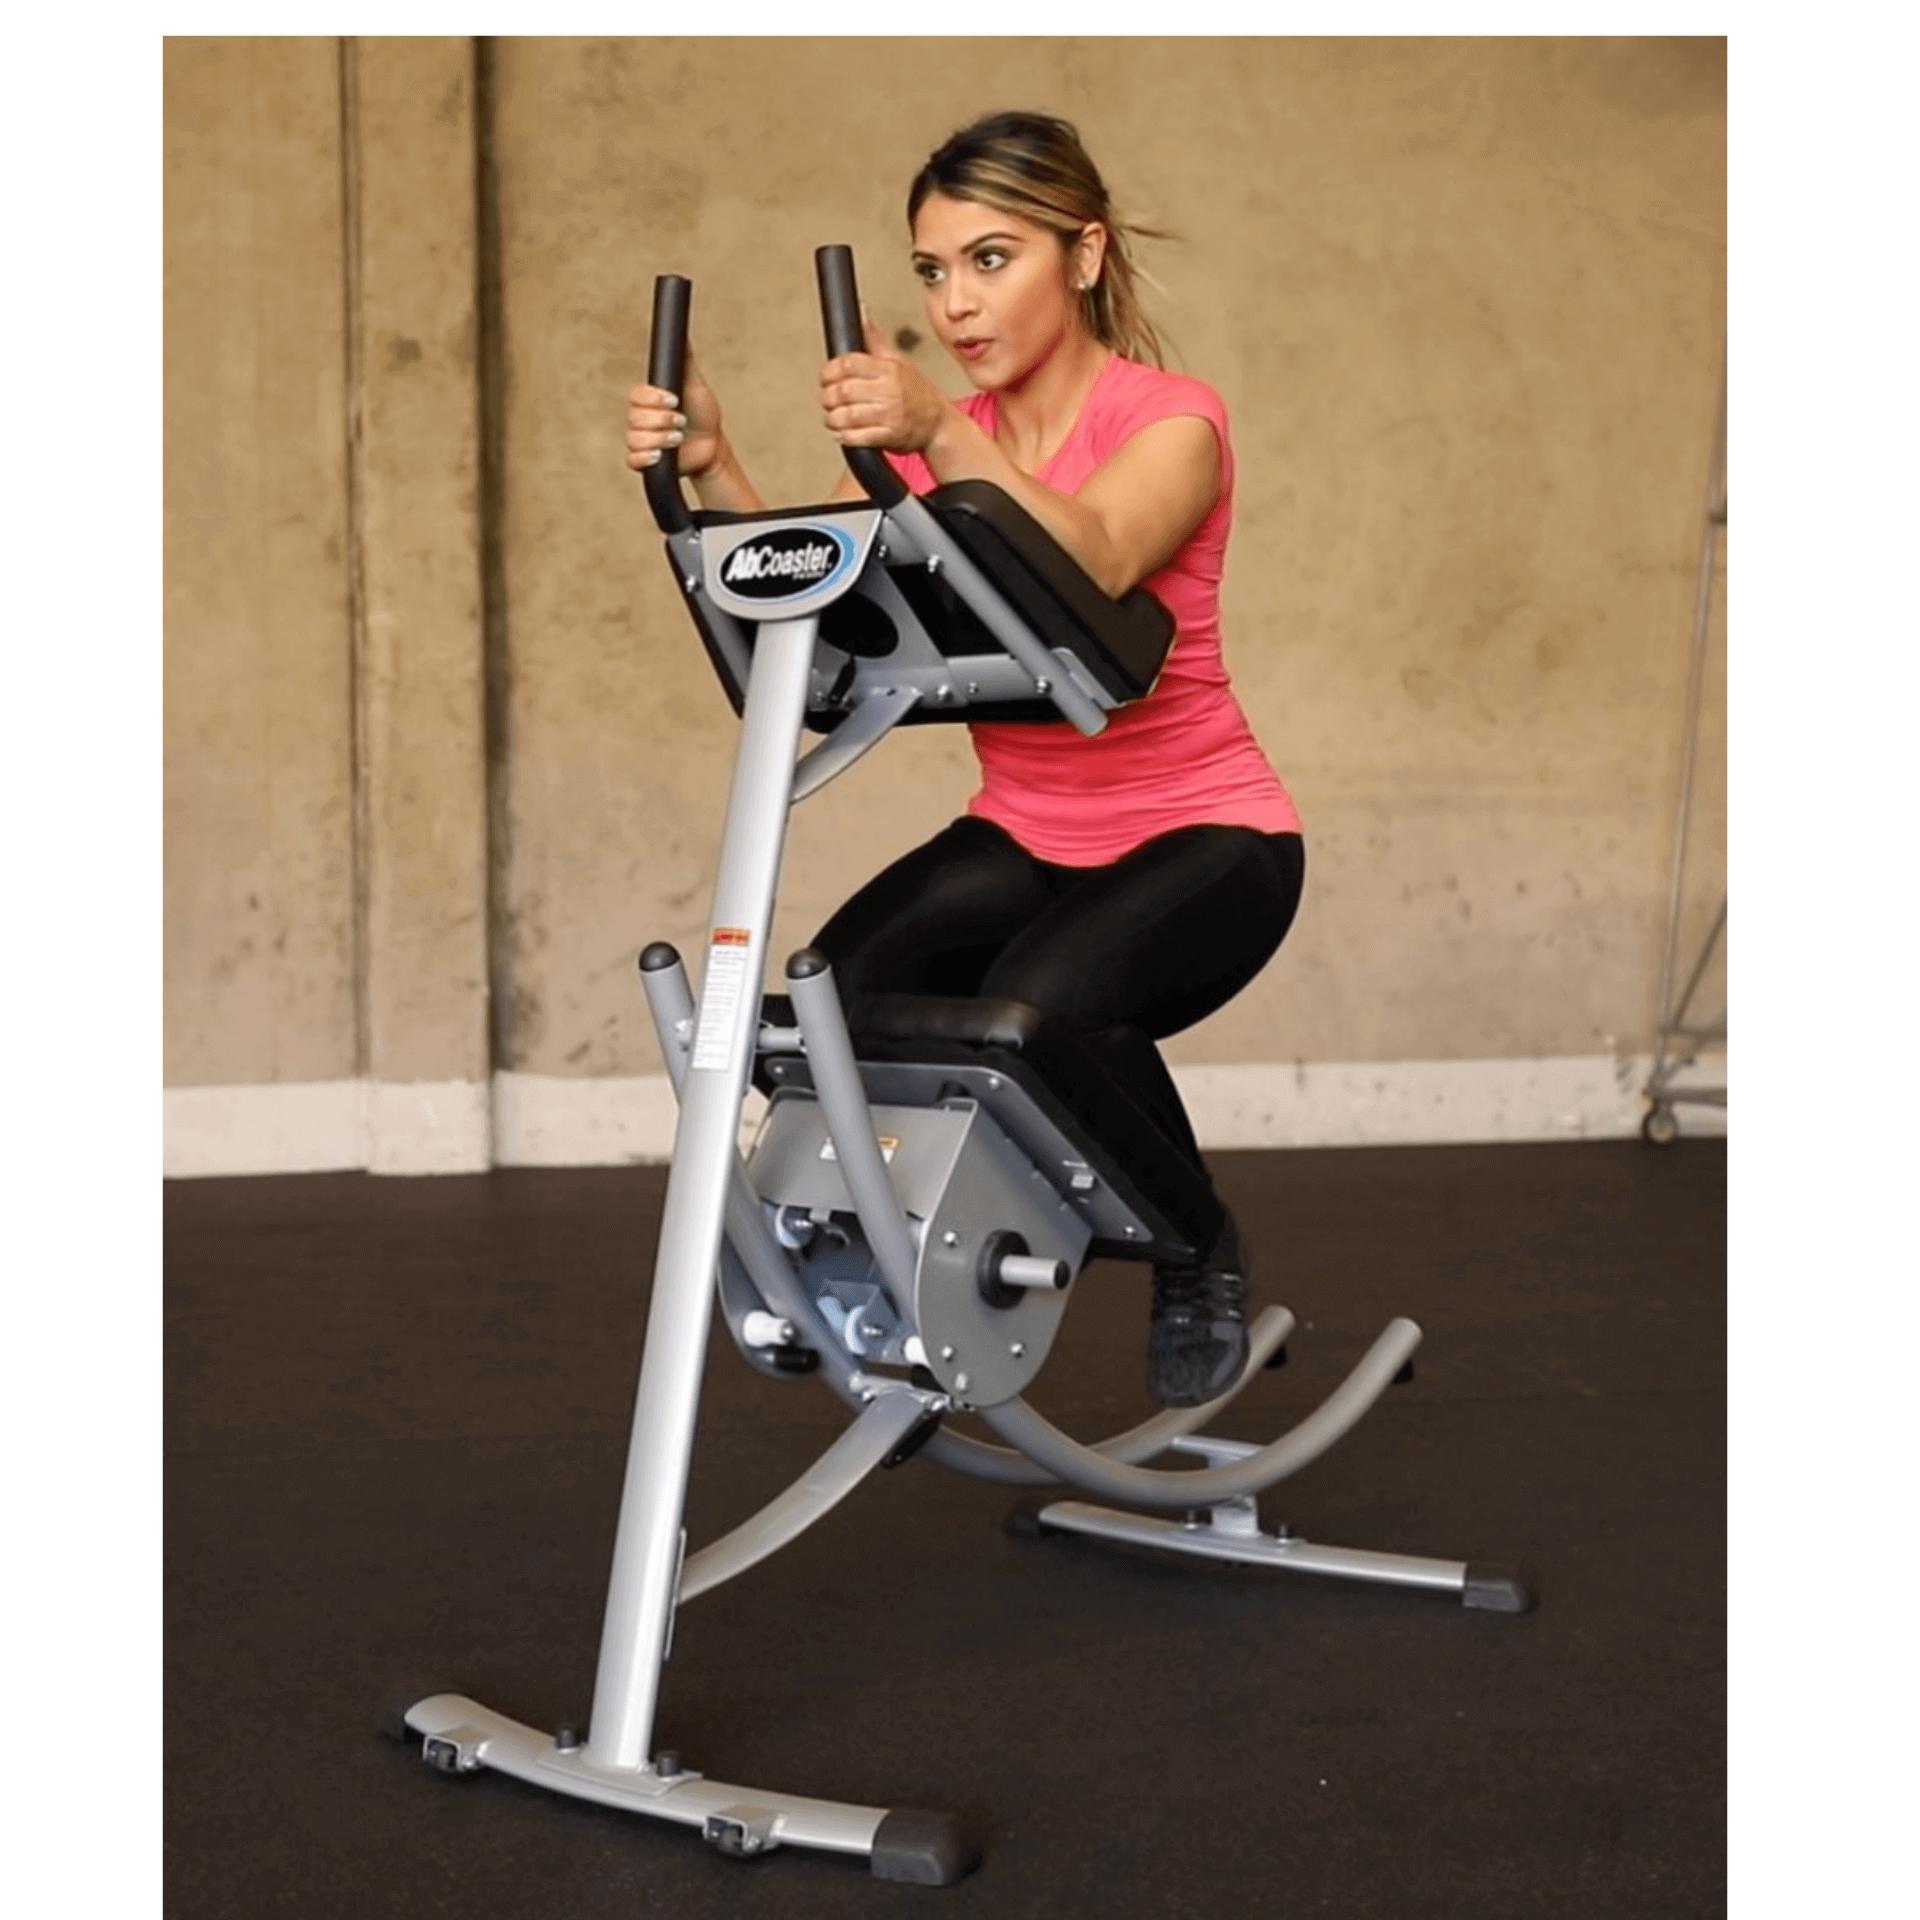 The Abs Company AB Coaster PS500 femal model exercising front side view